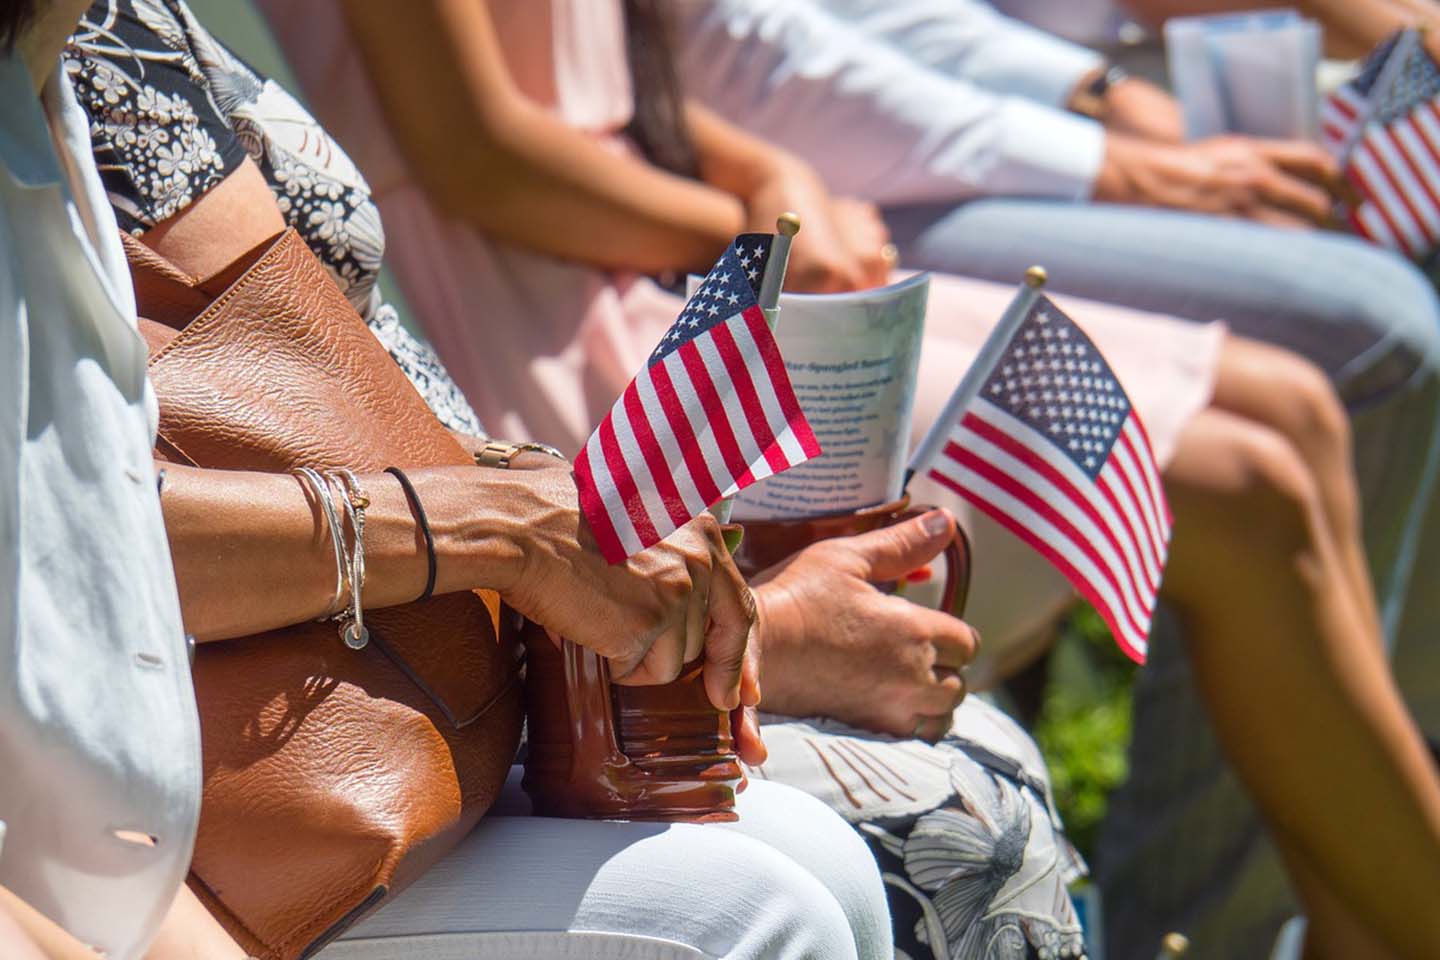 Four people sitting at a parade, each person holding one small American flag.